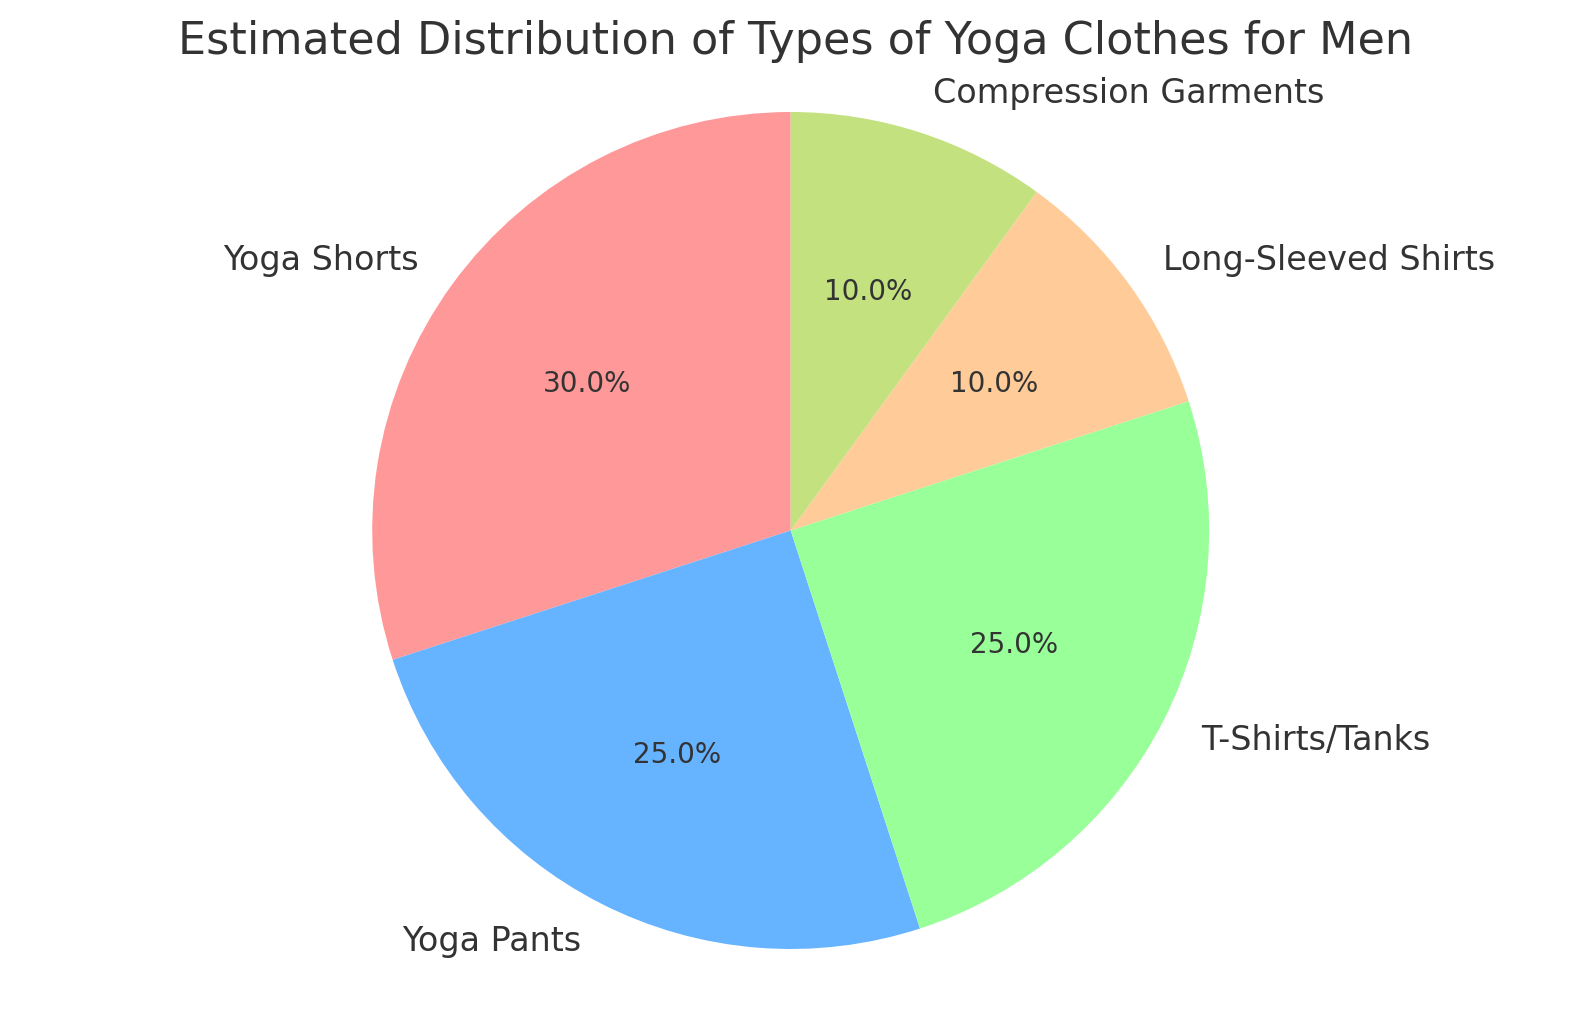 Estimated Distribution of Types of Yoga Clothes for Men